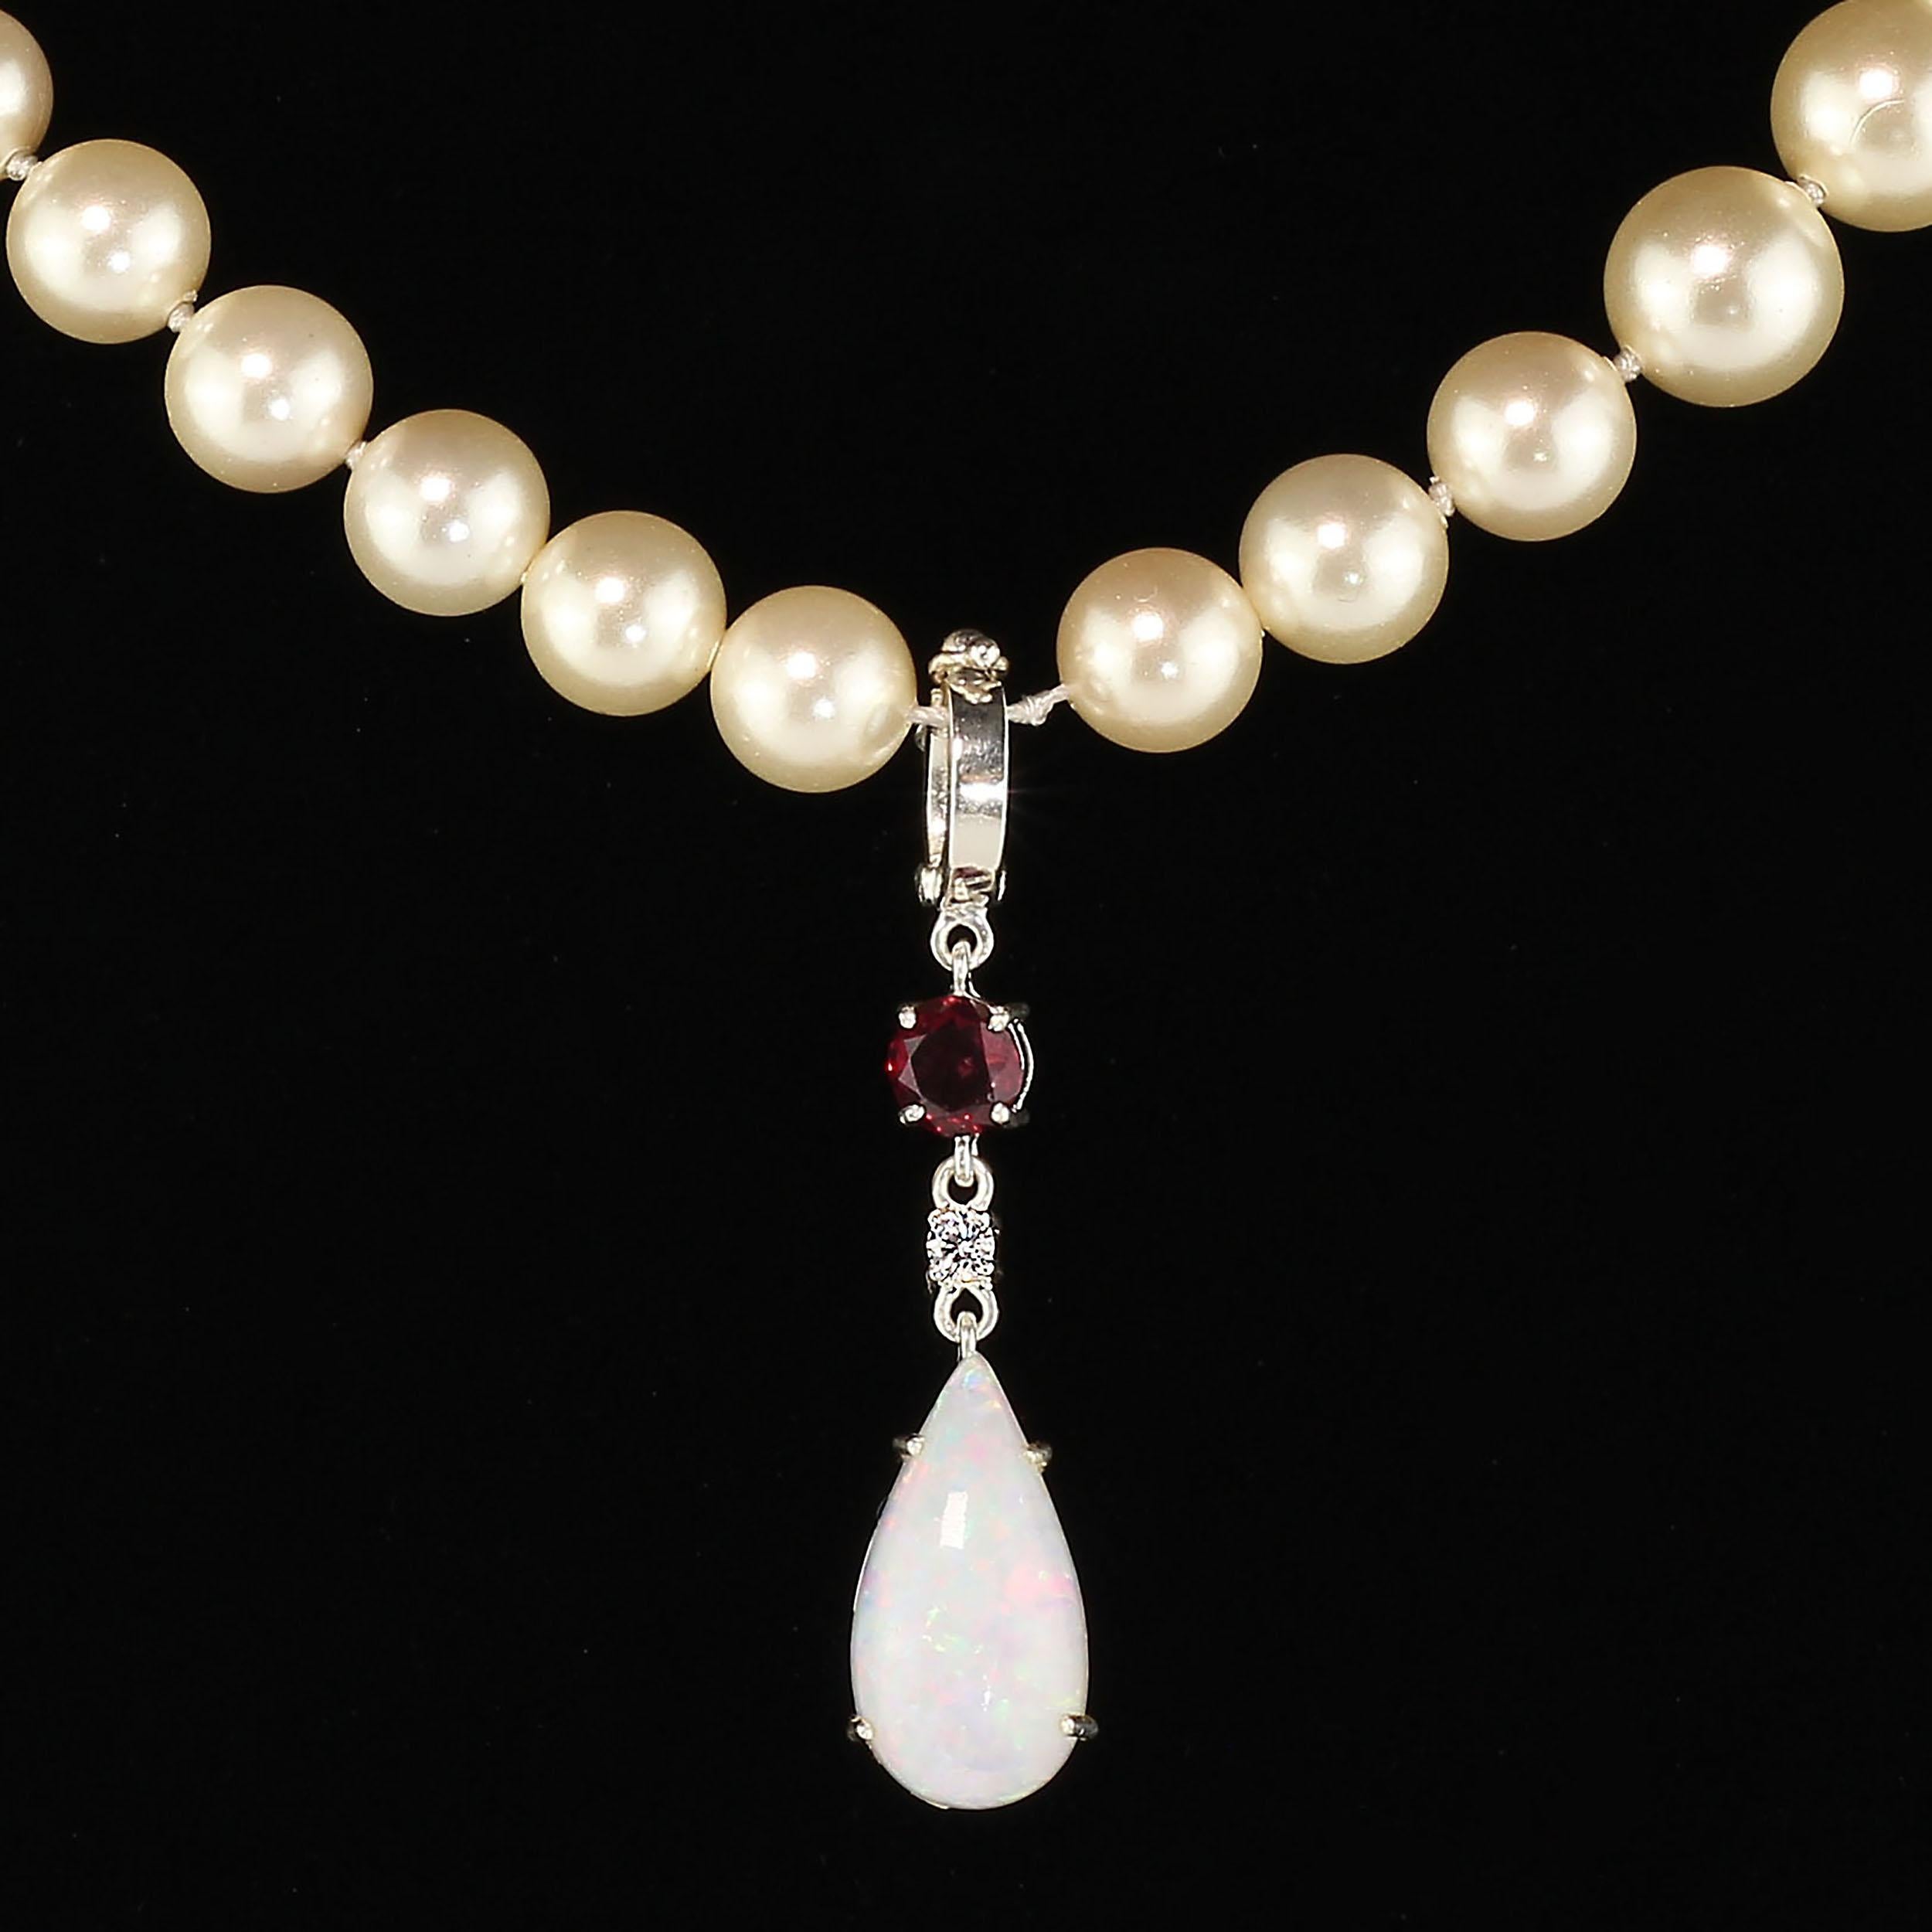 Gorgeous drop shaped Opal with flashes of red, blue, and green. How great is that?! This is so beautiful. This unique pendant is hinged for versatality so you can hang it on pearls, a narrow scarf, a chain, use your imagination. Below the hinge is a